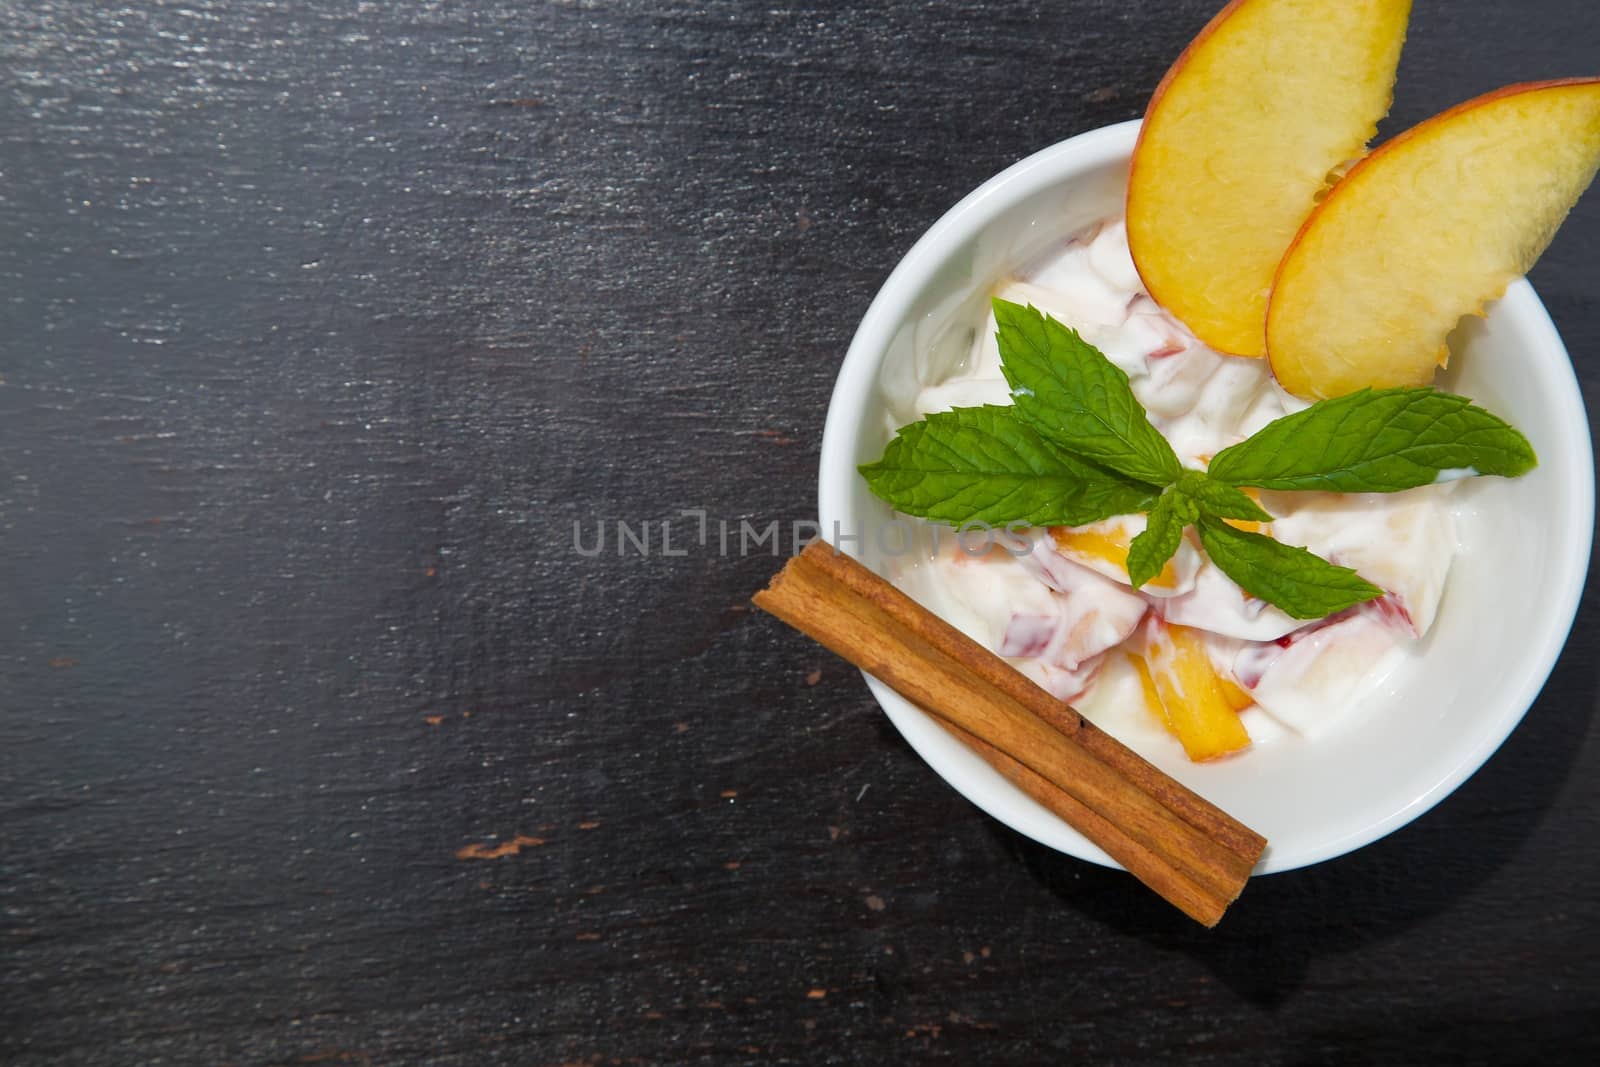 Homemade peach yogurt in a white dish on the black wooden surface. Decorated with two slices of fresh peach and fresh peppermint leaves and cinnamon stick. Top view. Free space for a text